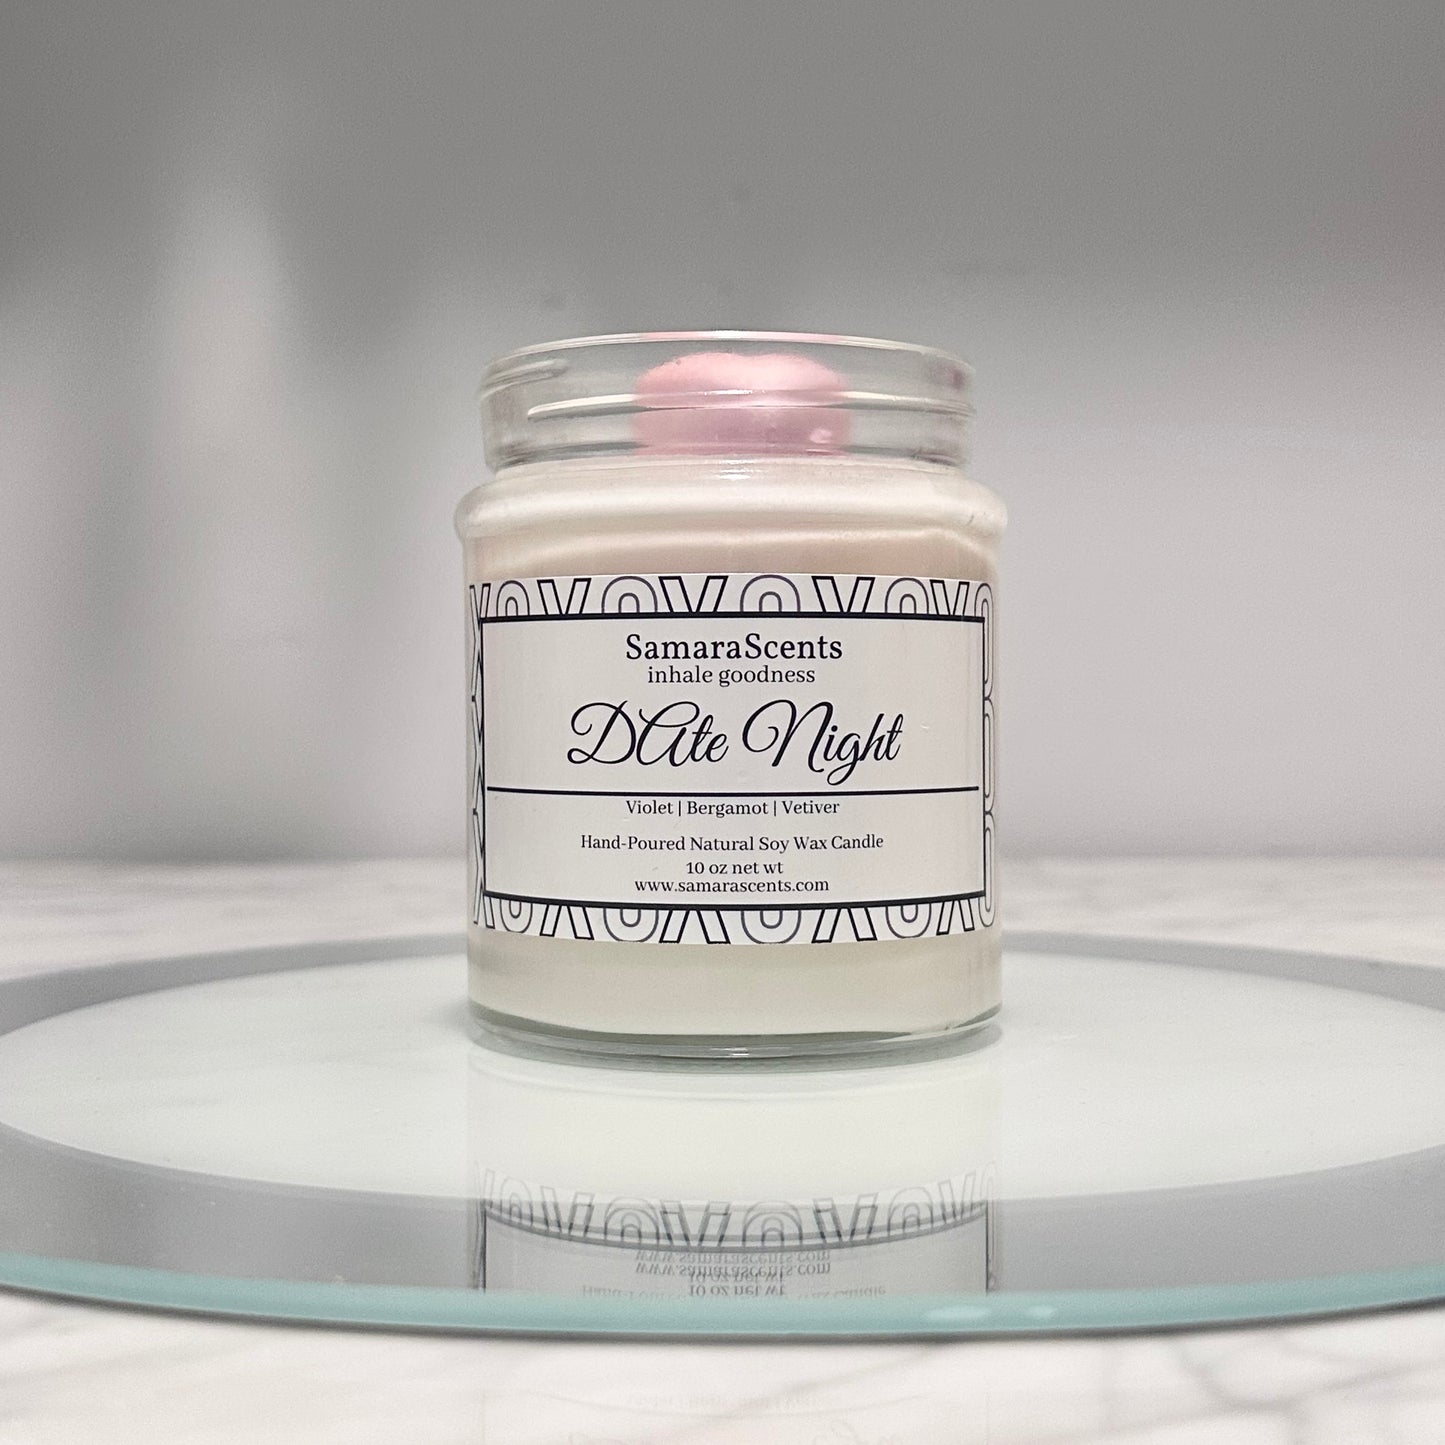 Date Night Soy Candle